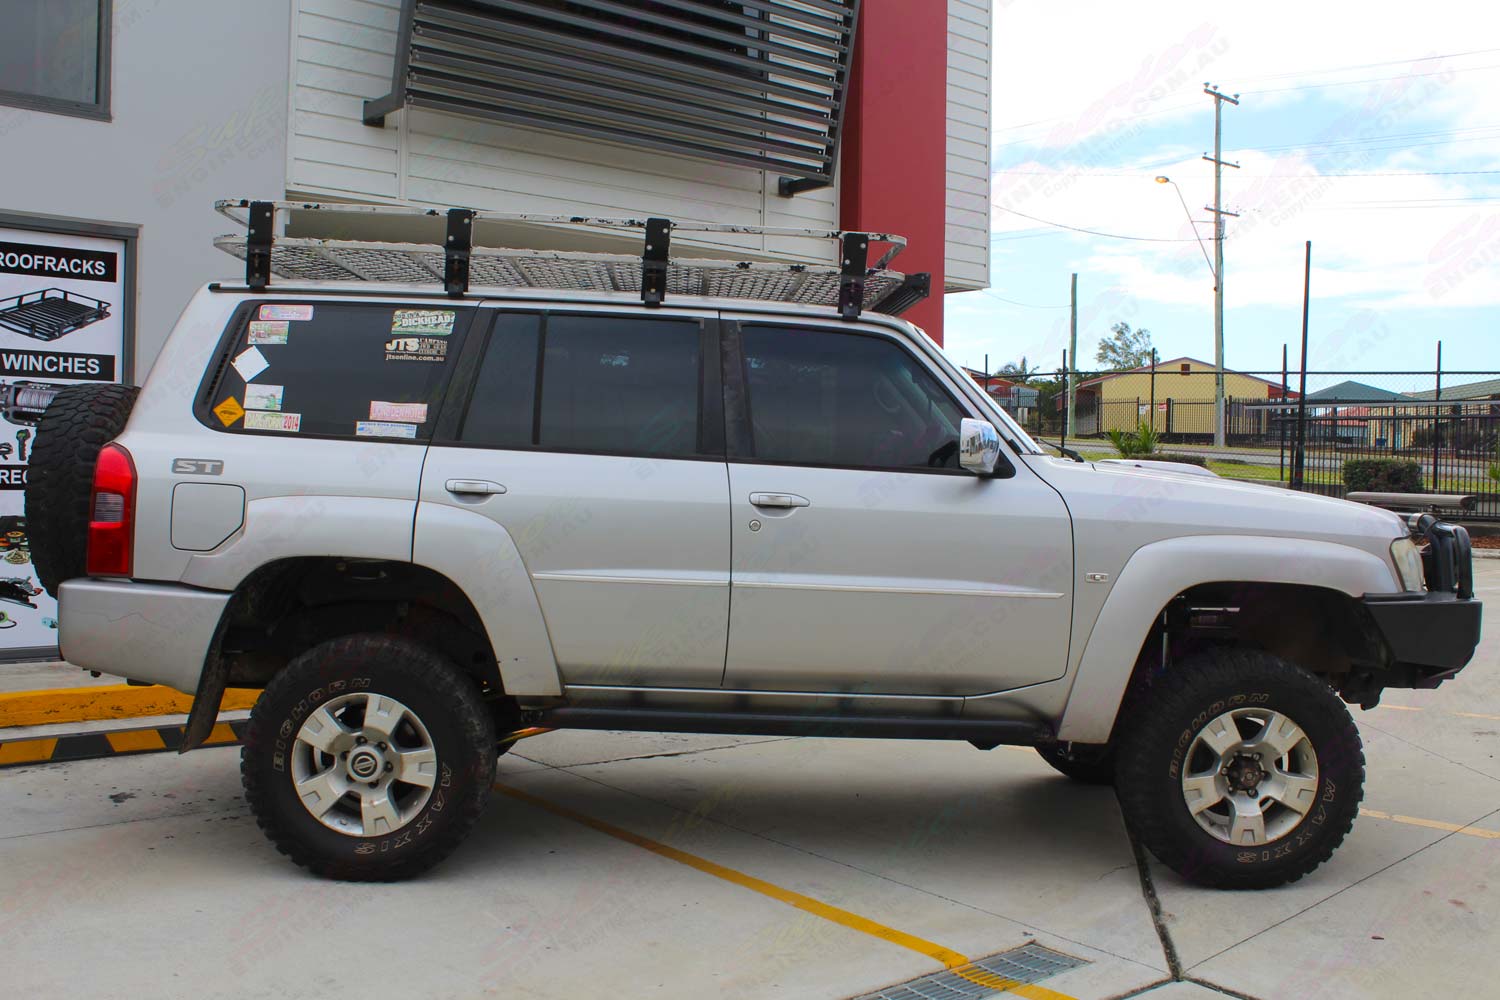 Right side view of a silver GU Nissan Patrol Wagon at the Deception Bay 4x4 showroom after fitting a 4 inch Superior Remote Reservoir Drop Box Lift Kit